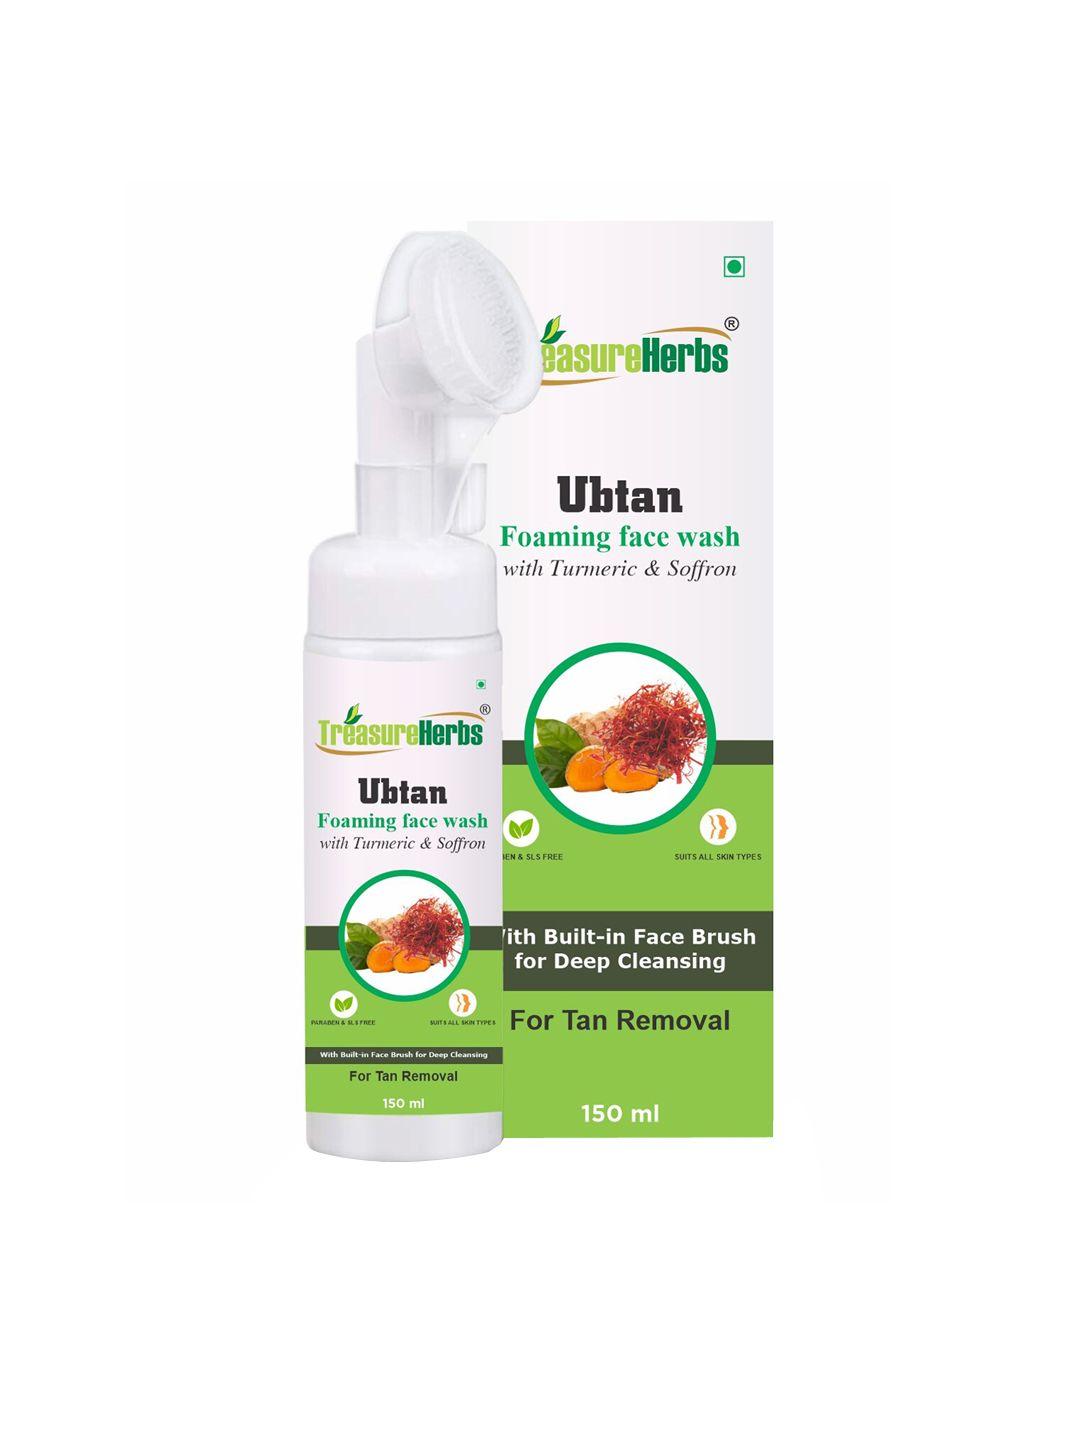 treasureherbs ubtan foaming face wash with built-in face brush for deep cleansing 150 ml